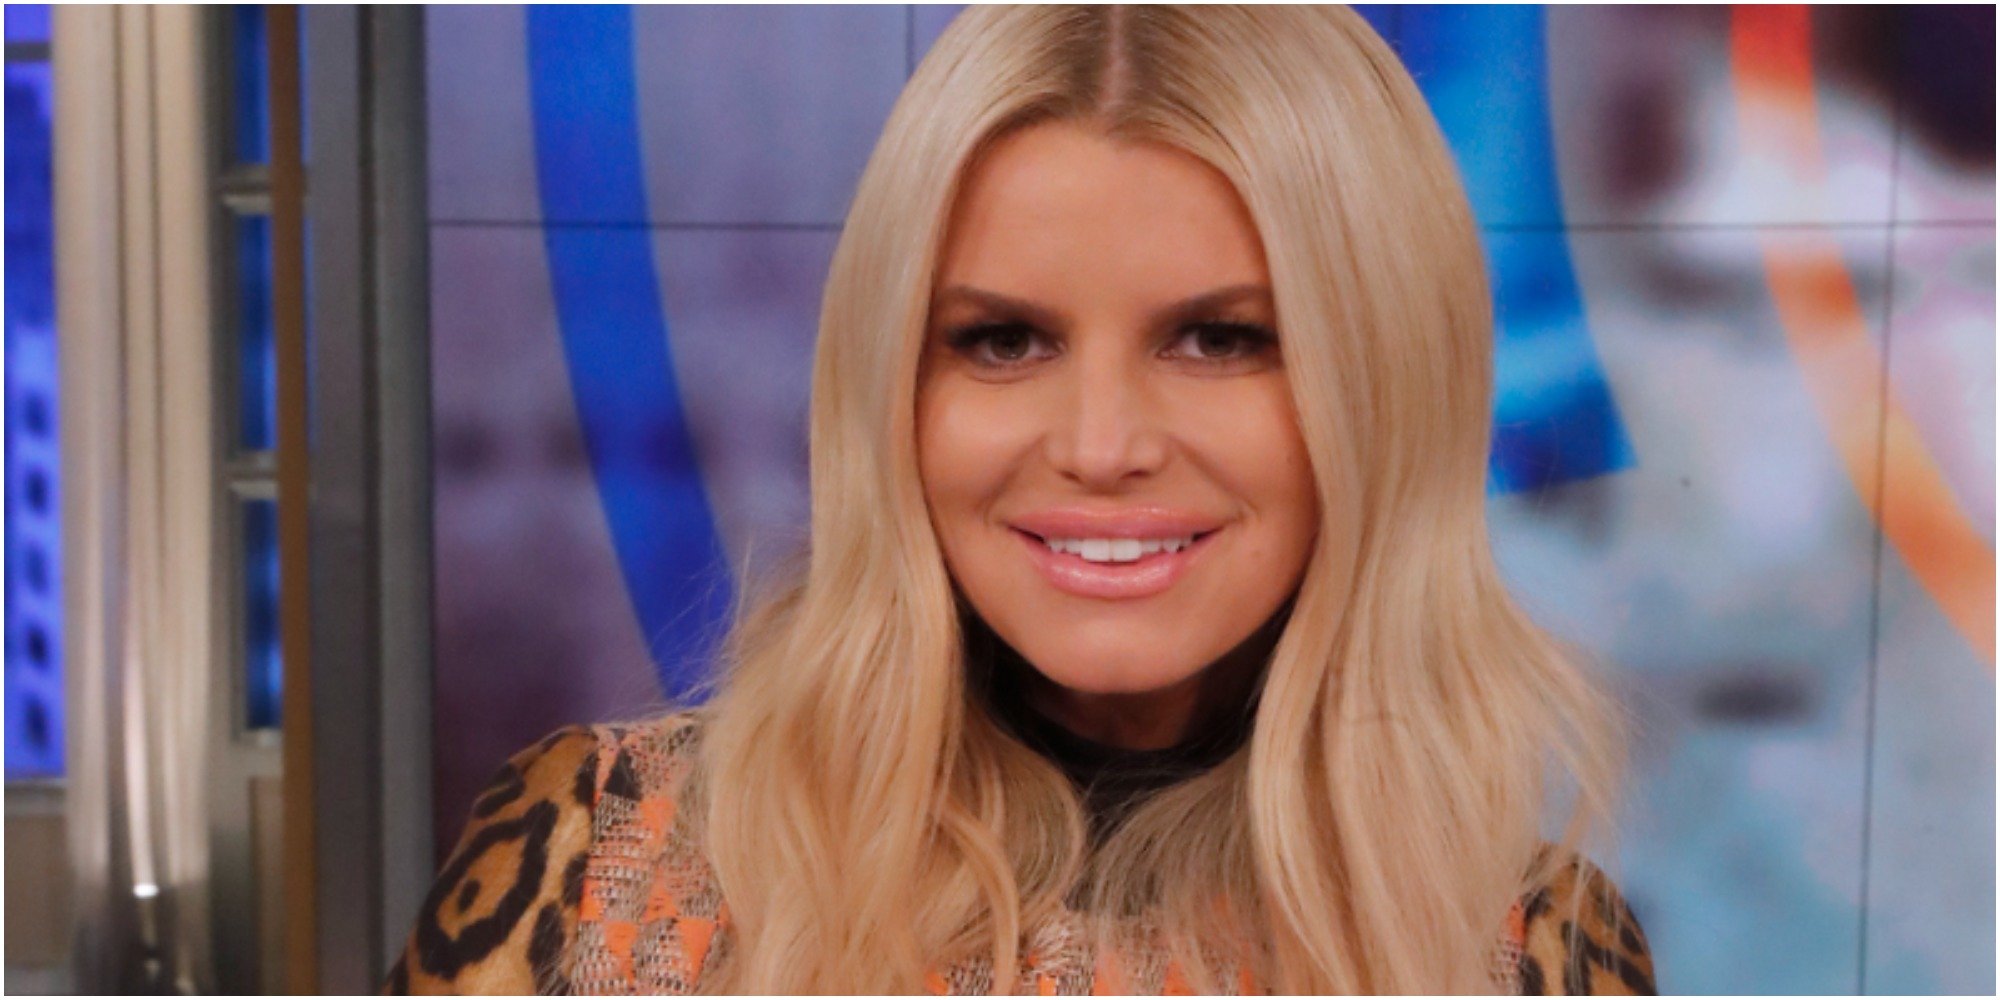 Jessica Simpson on the set of "The View" in February 2020.